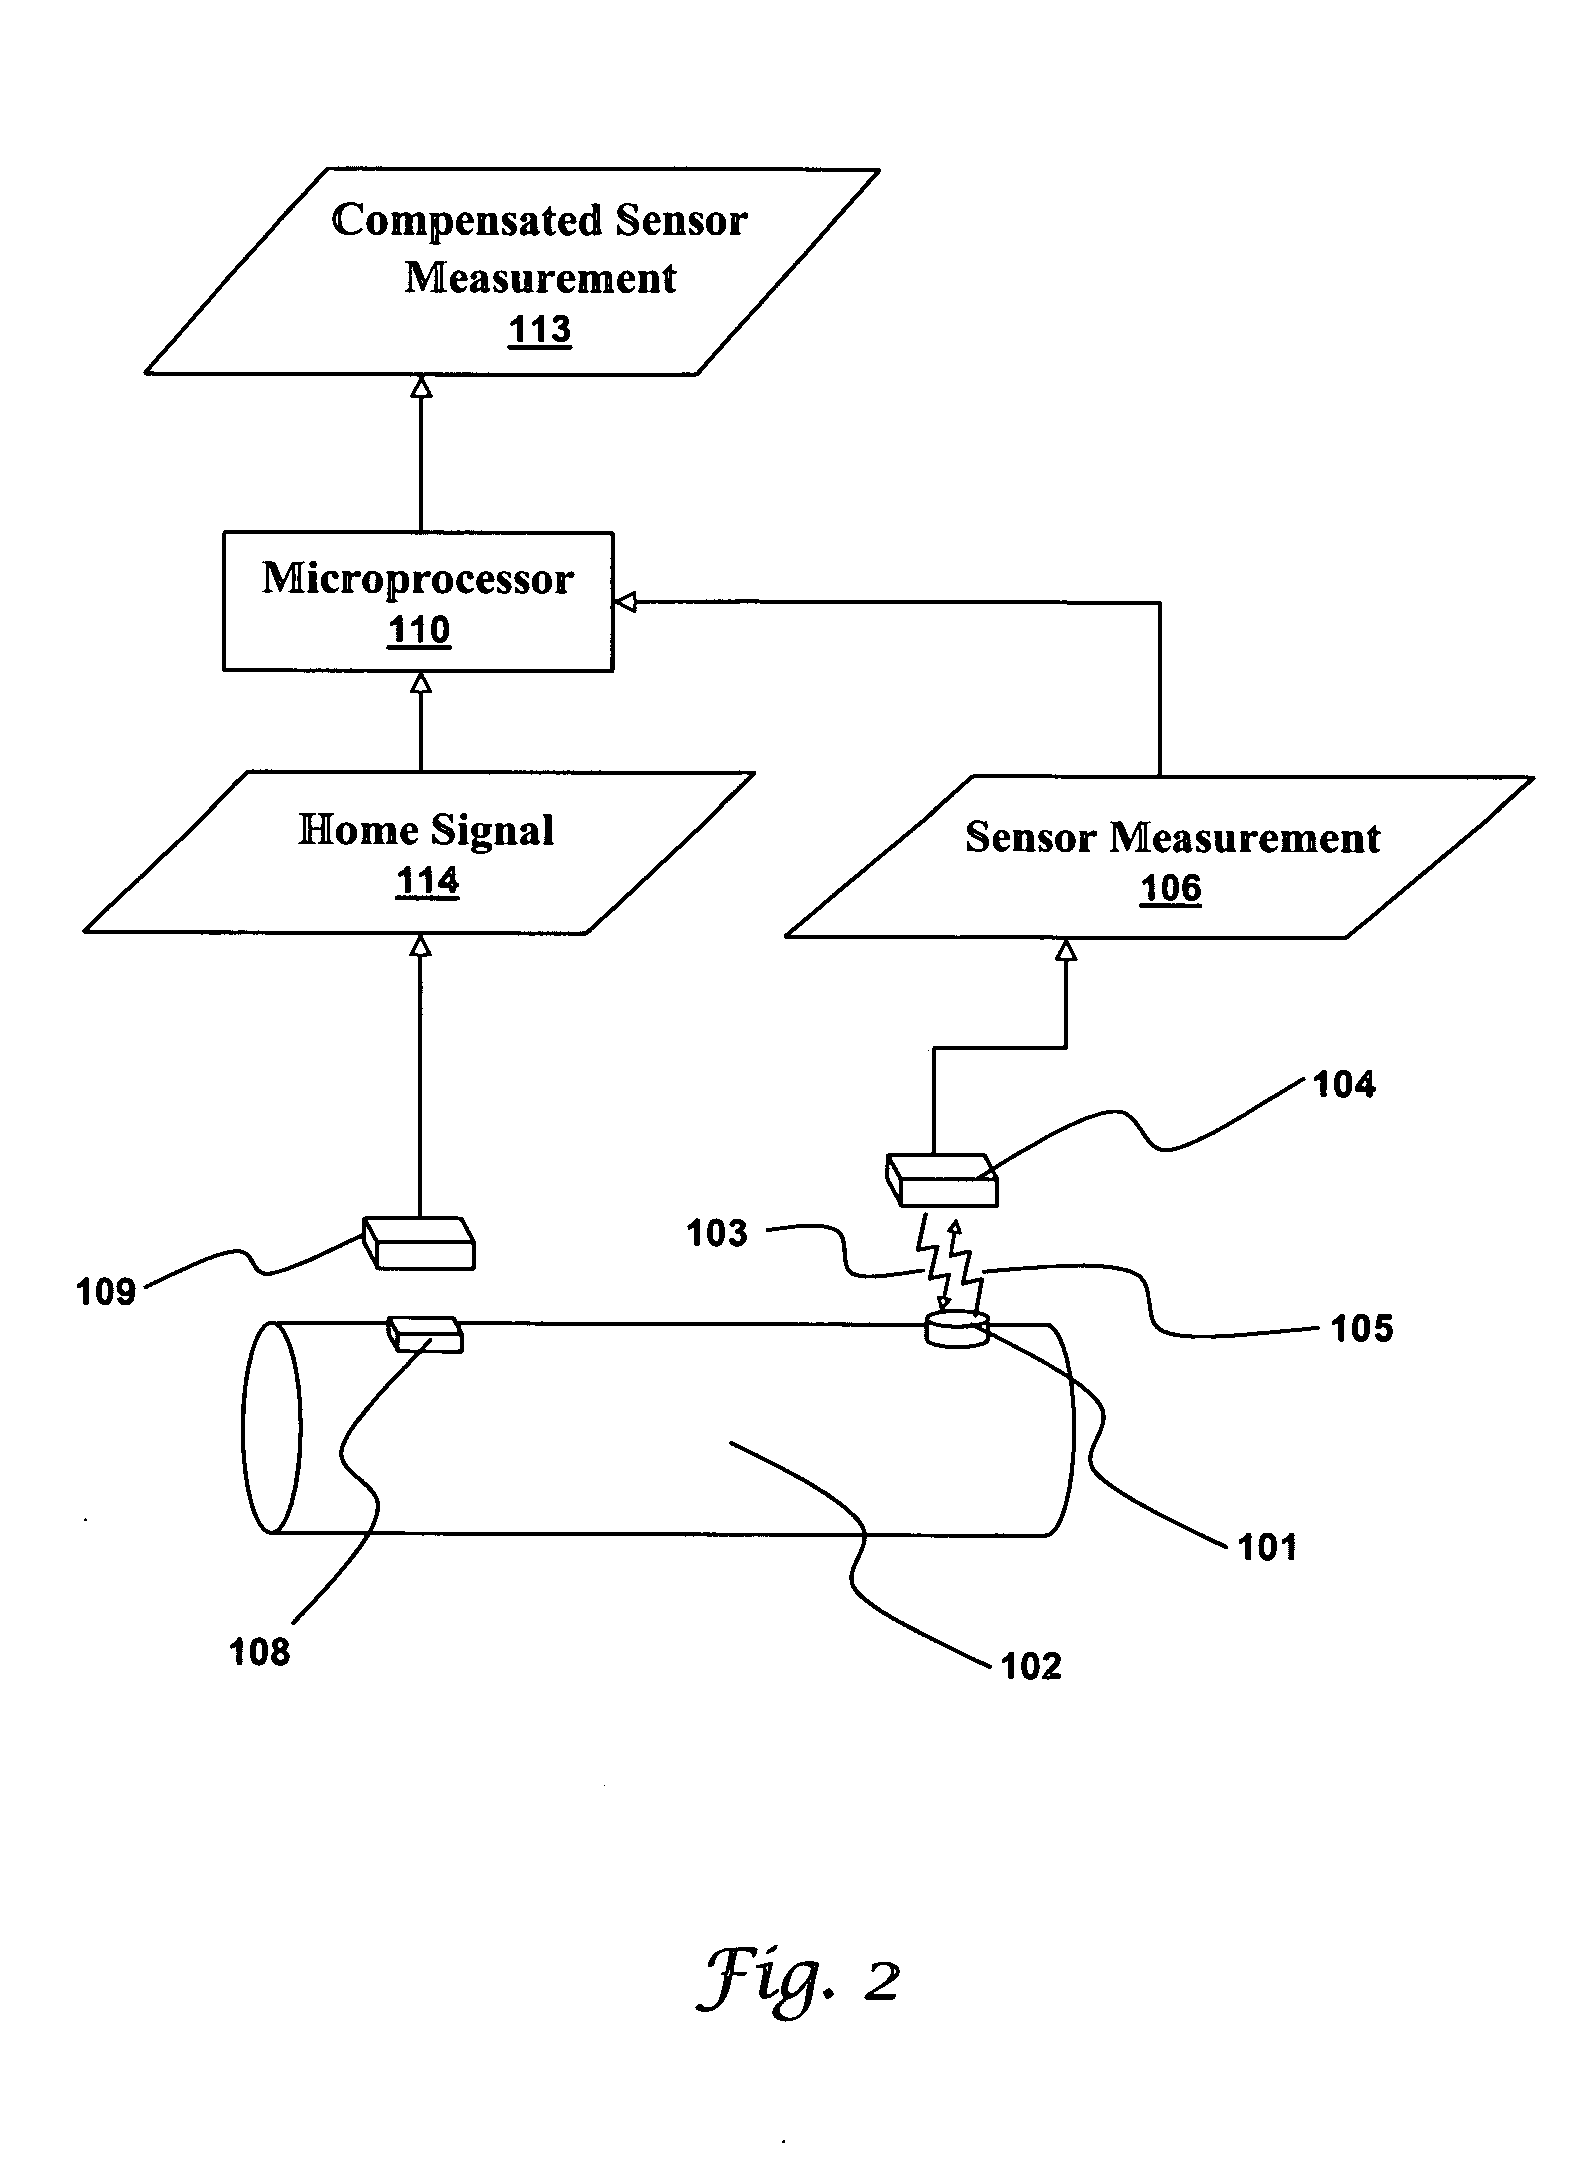 Error compensation for a wireless sensor using a rotating microstrip coupler to stimulate and interrogate a saw device